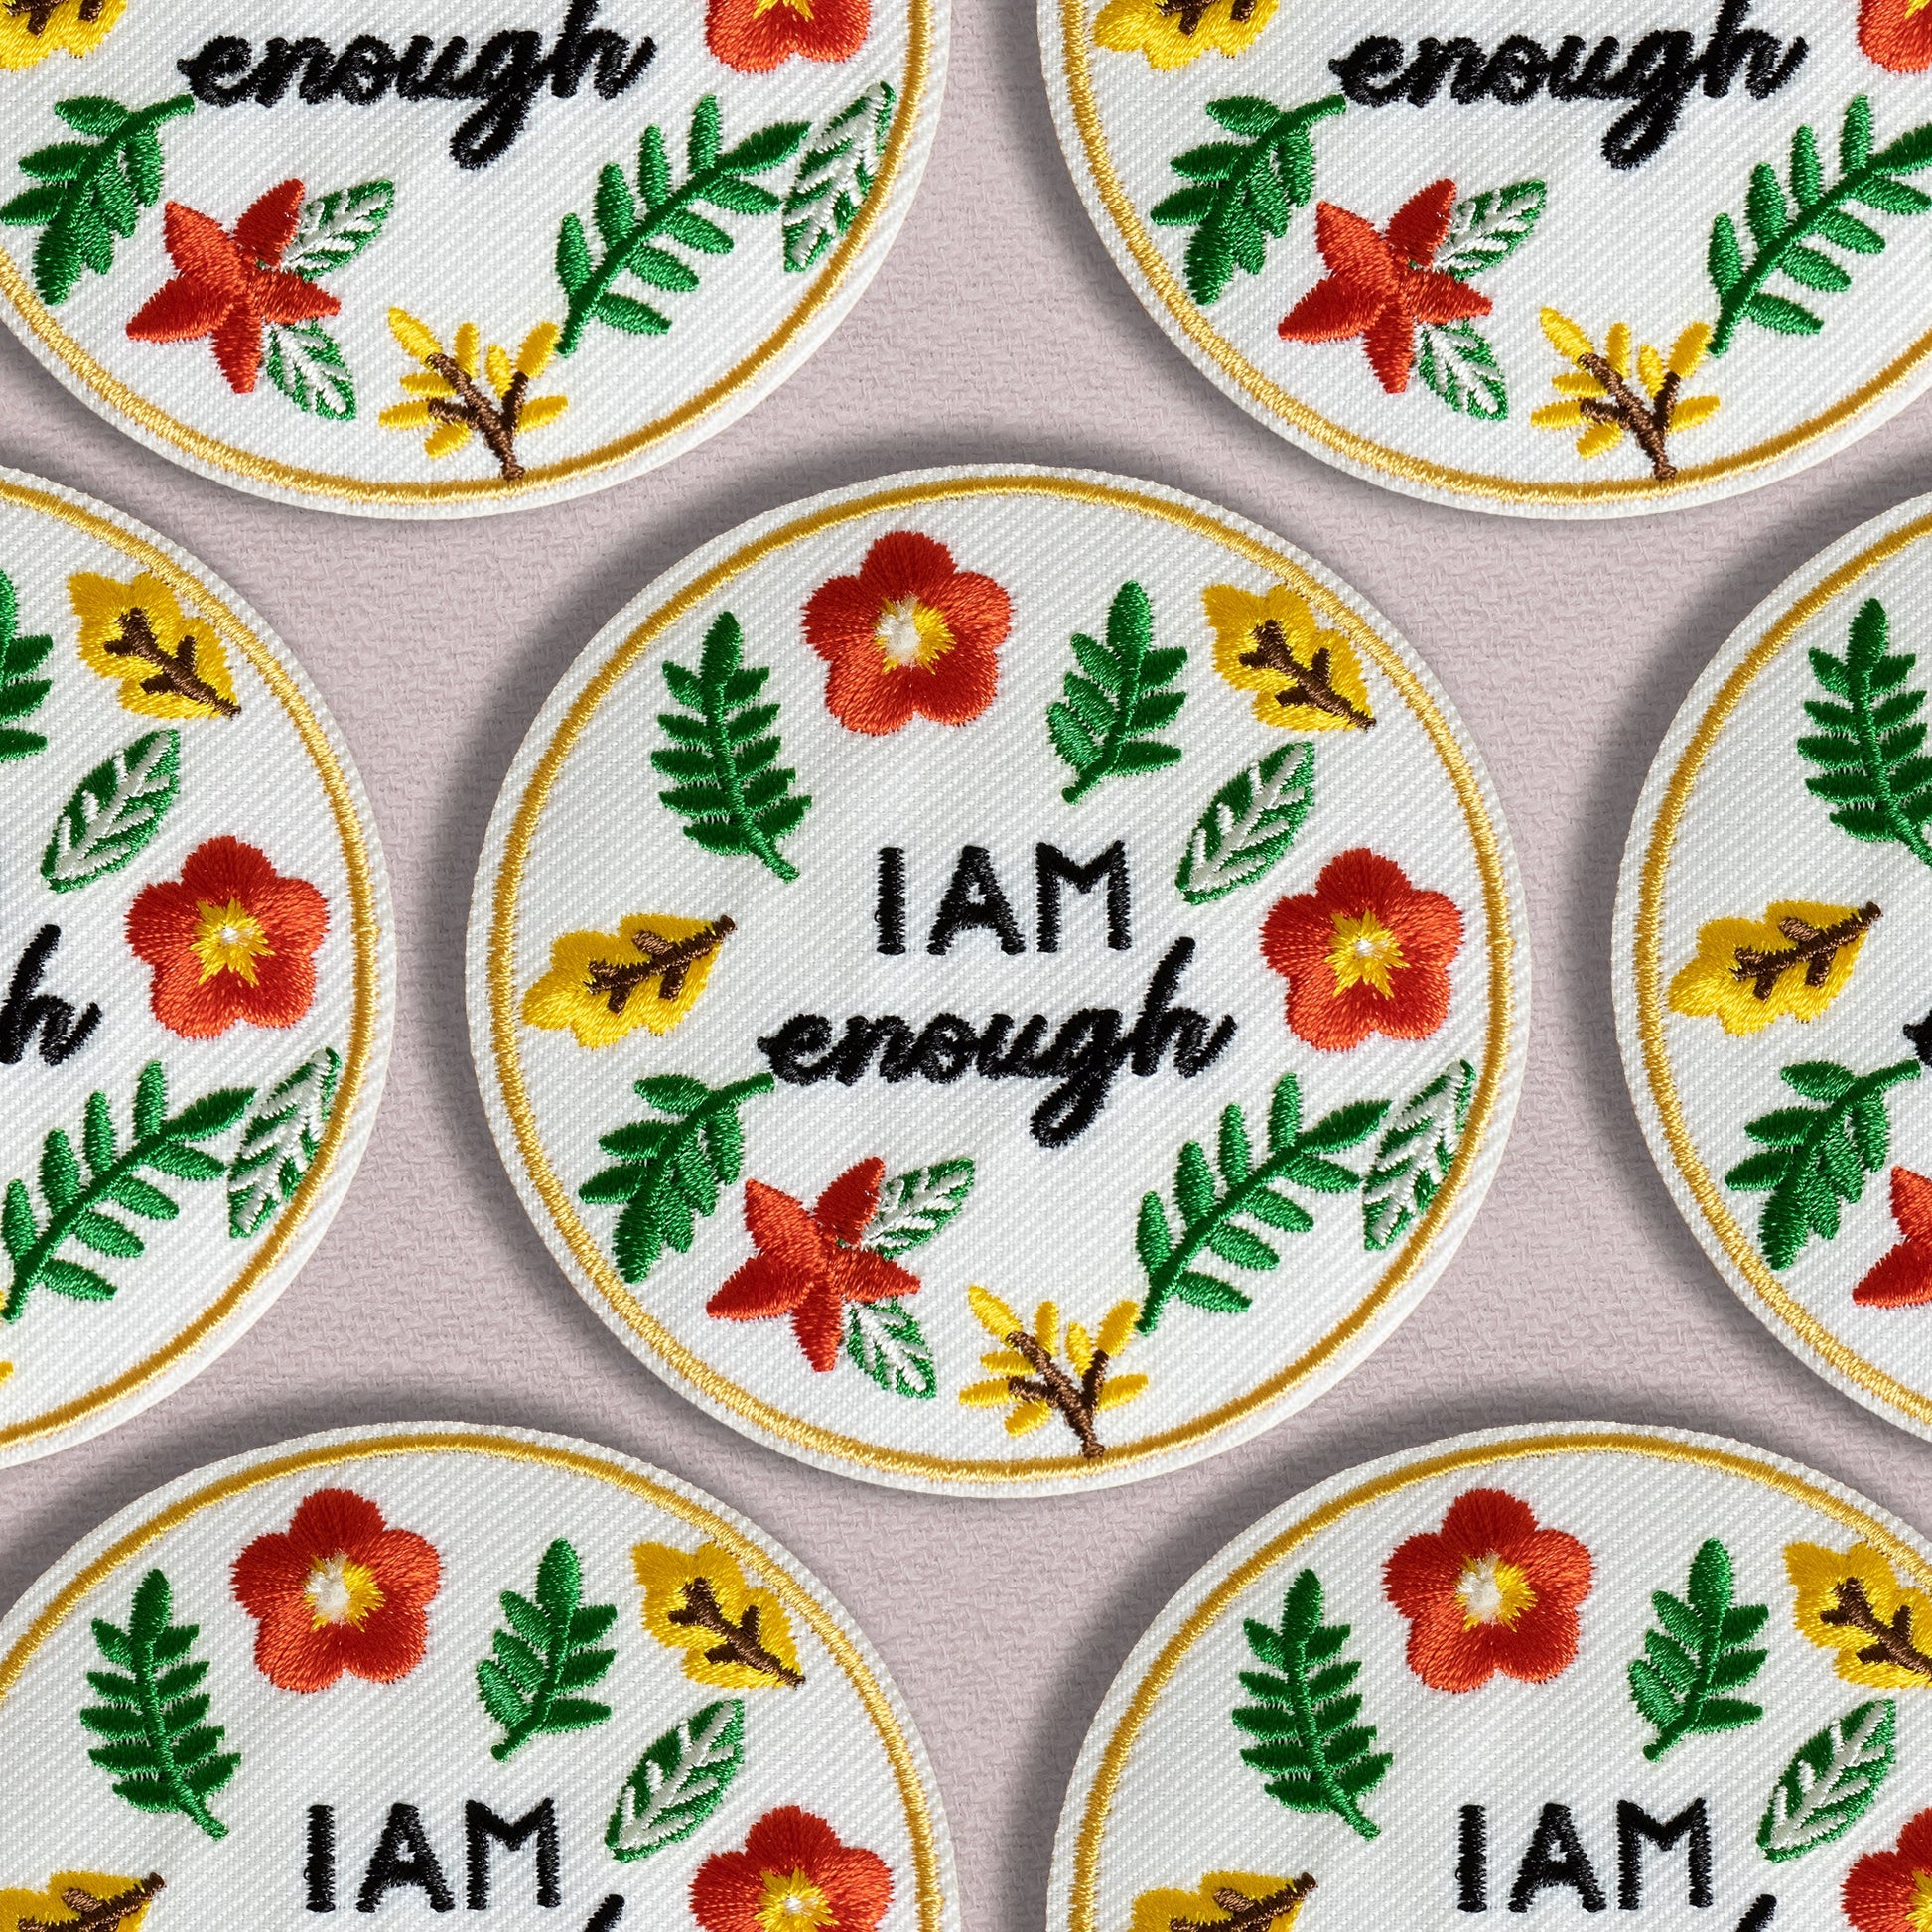 I Am Enough - Embroidered Iron On Patch - Muse + Moonstone